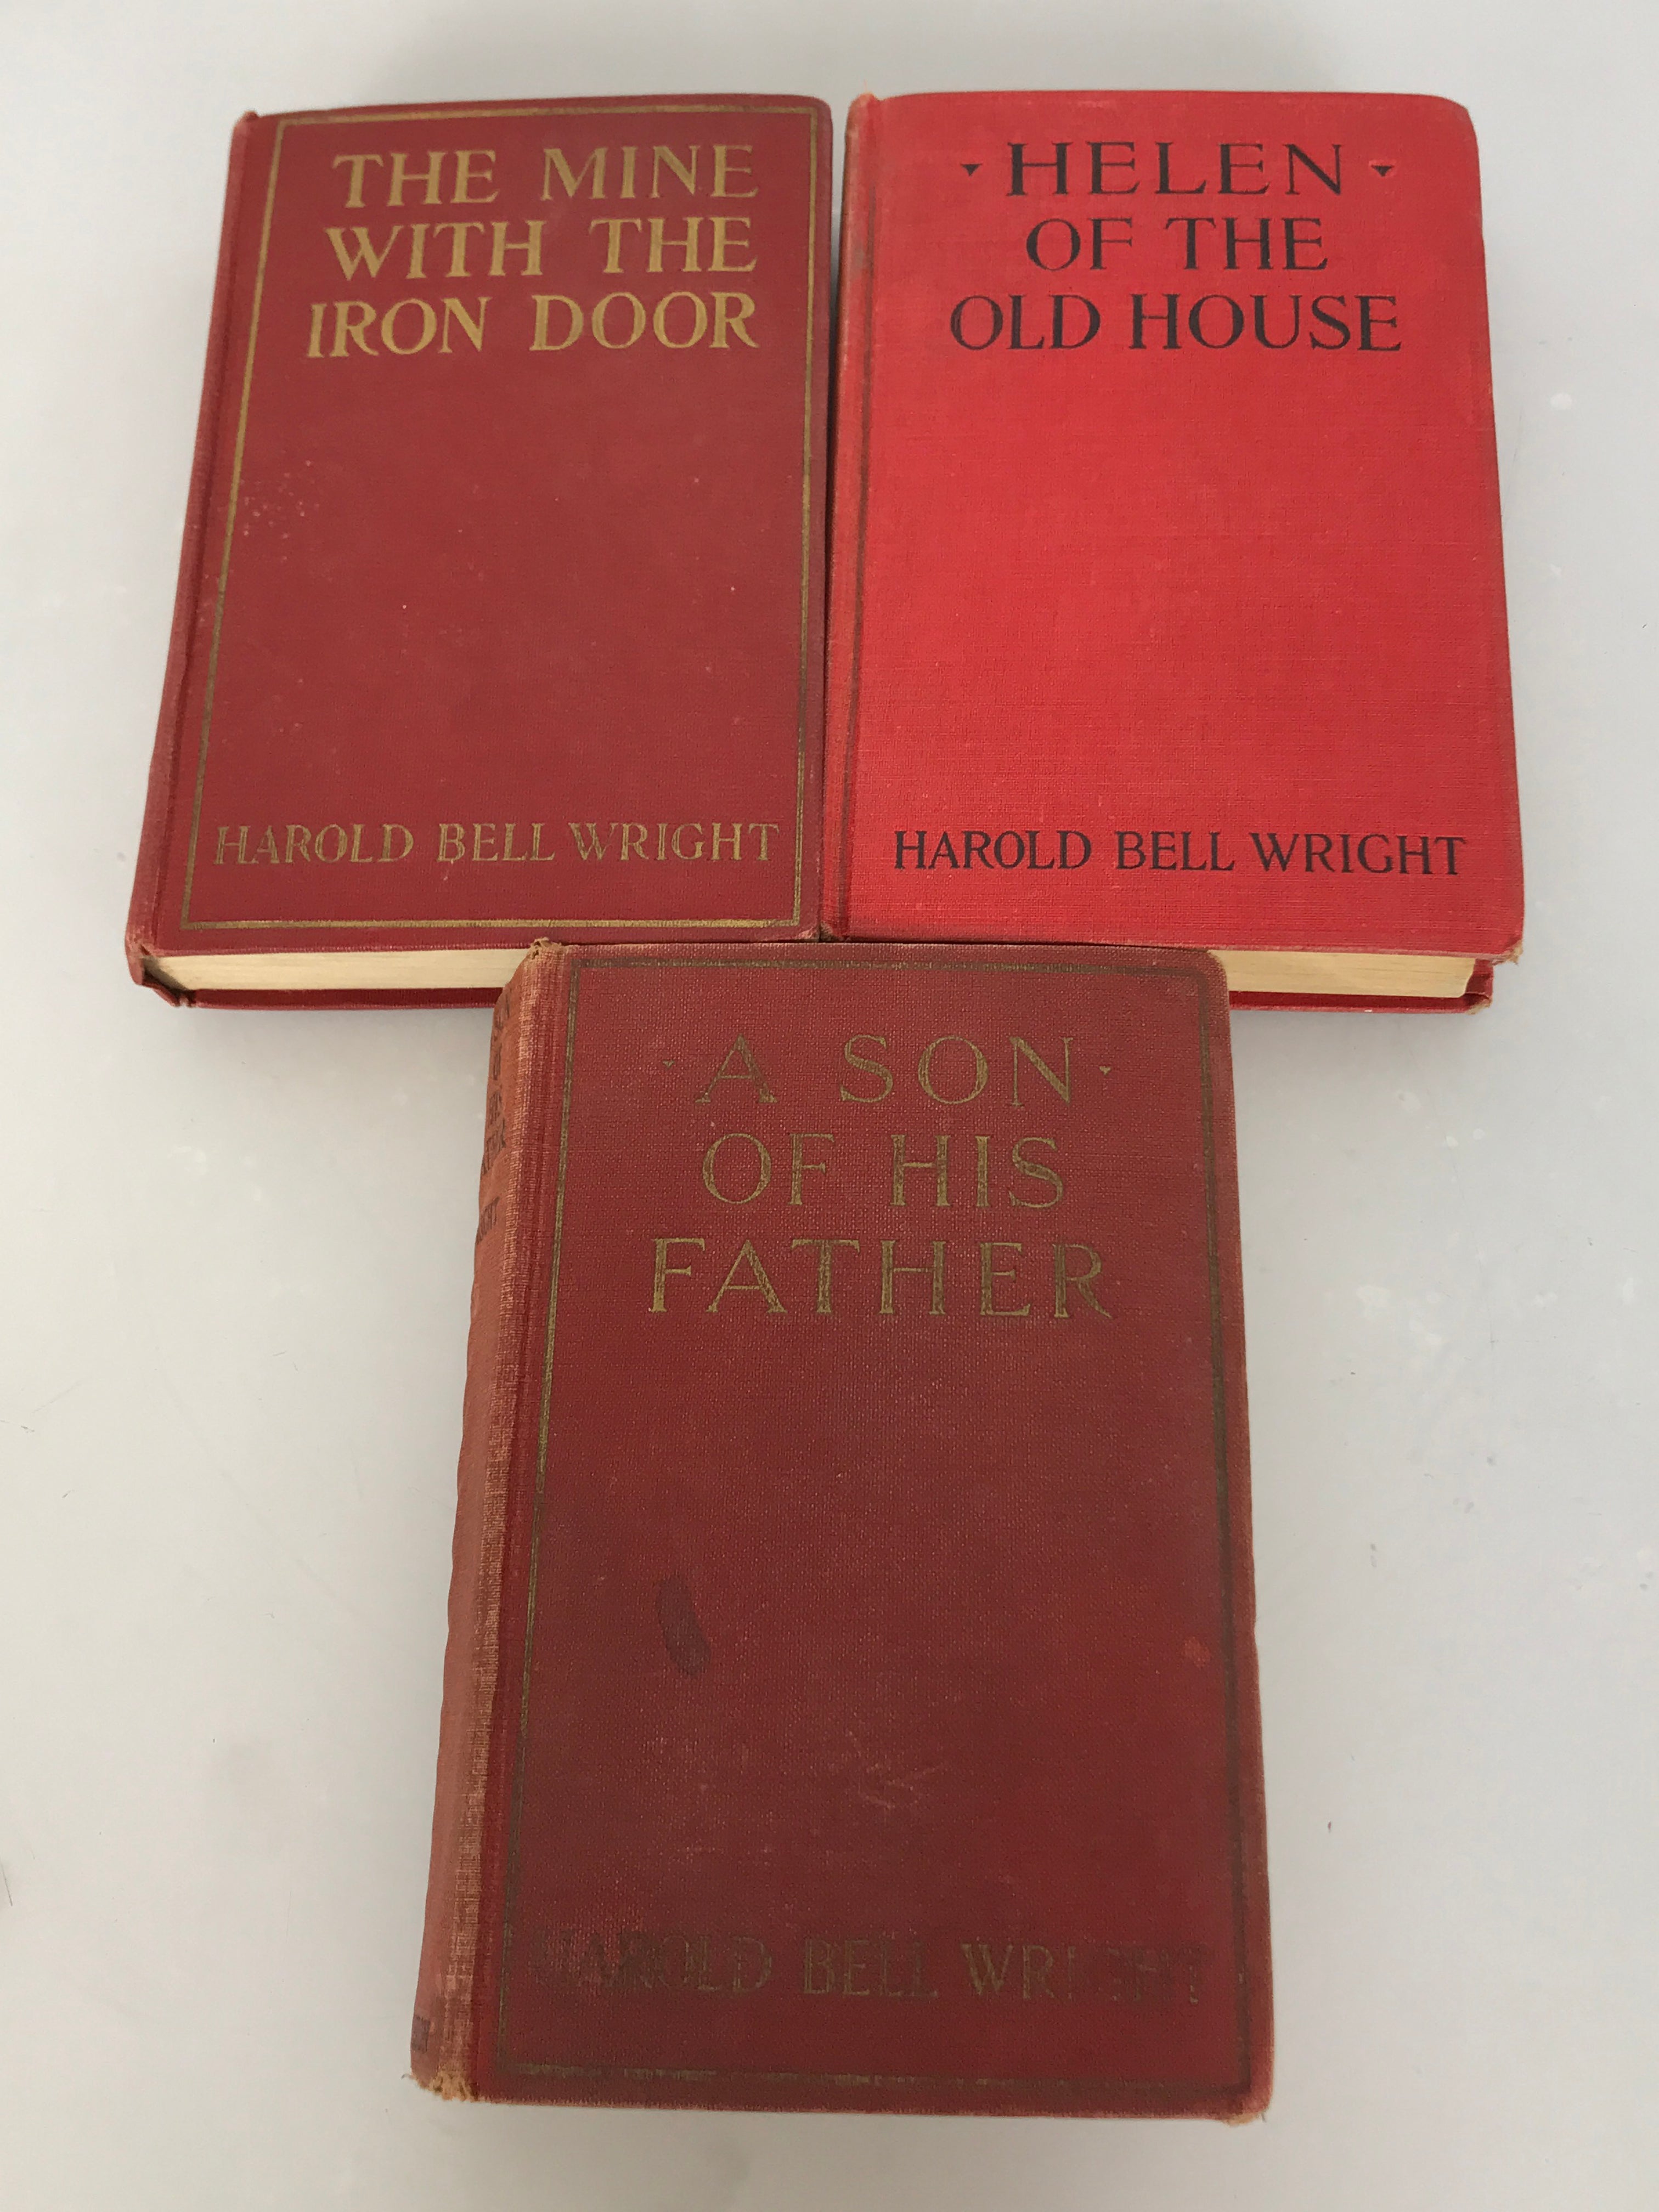 Lot of 3 Harold Bell Wright Books: A Son of His Father (1925), Helen of the Old House (1921), and The Mine With the Iron Door (1923) HC